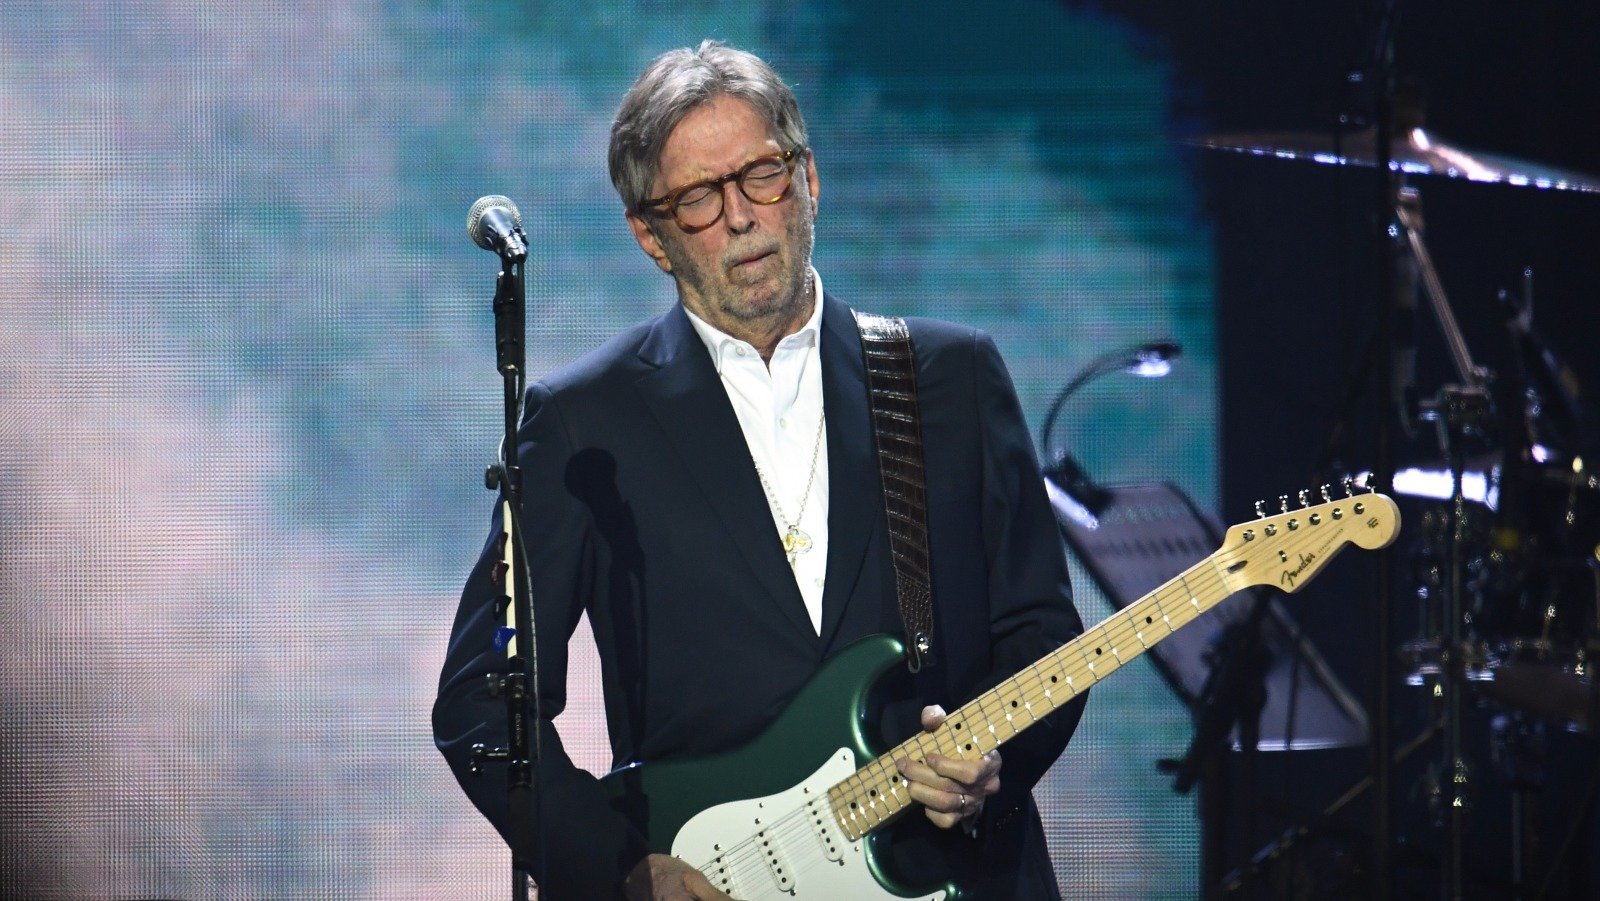 You Wouldn't Want To Meet Eric Clapton In Real Life. Here's Why